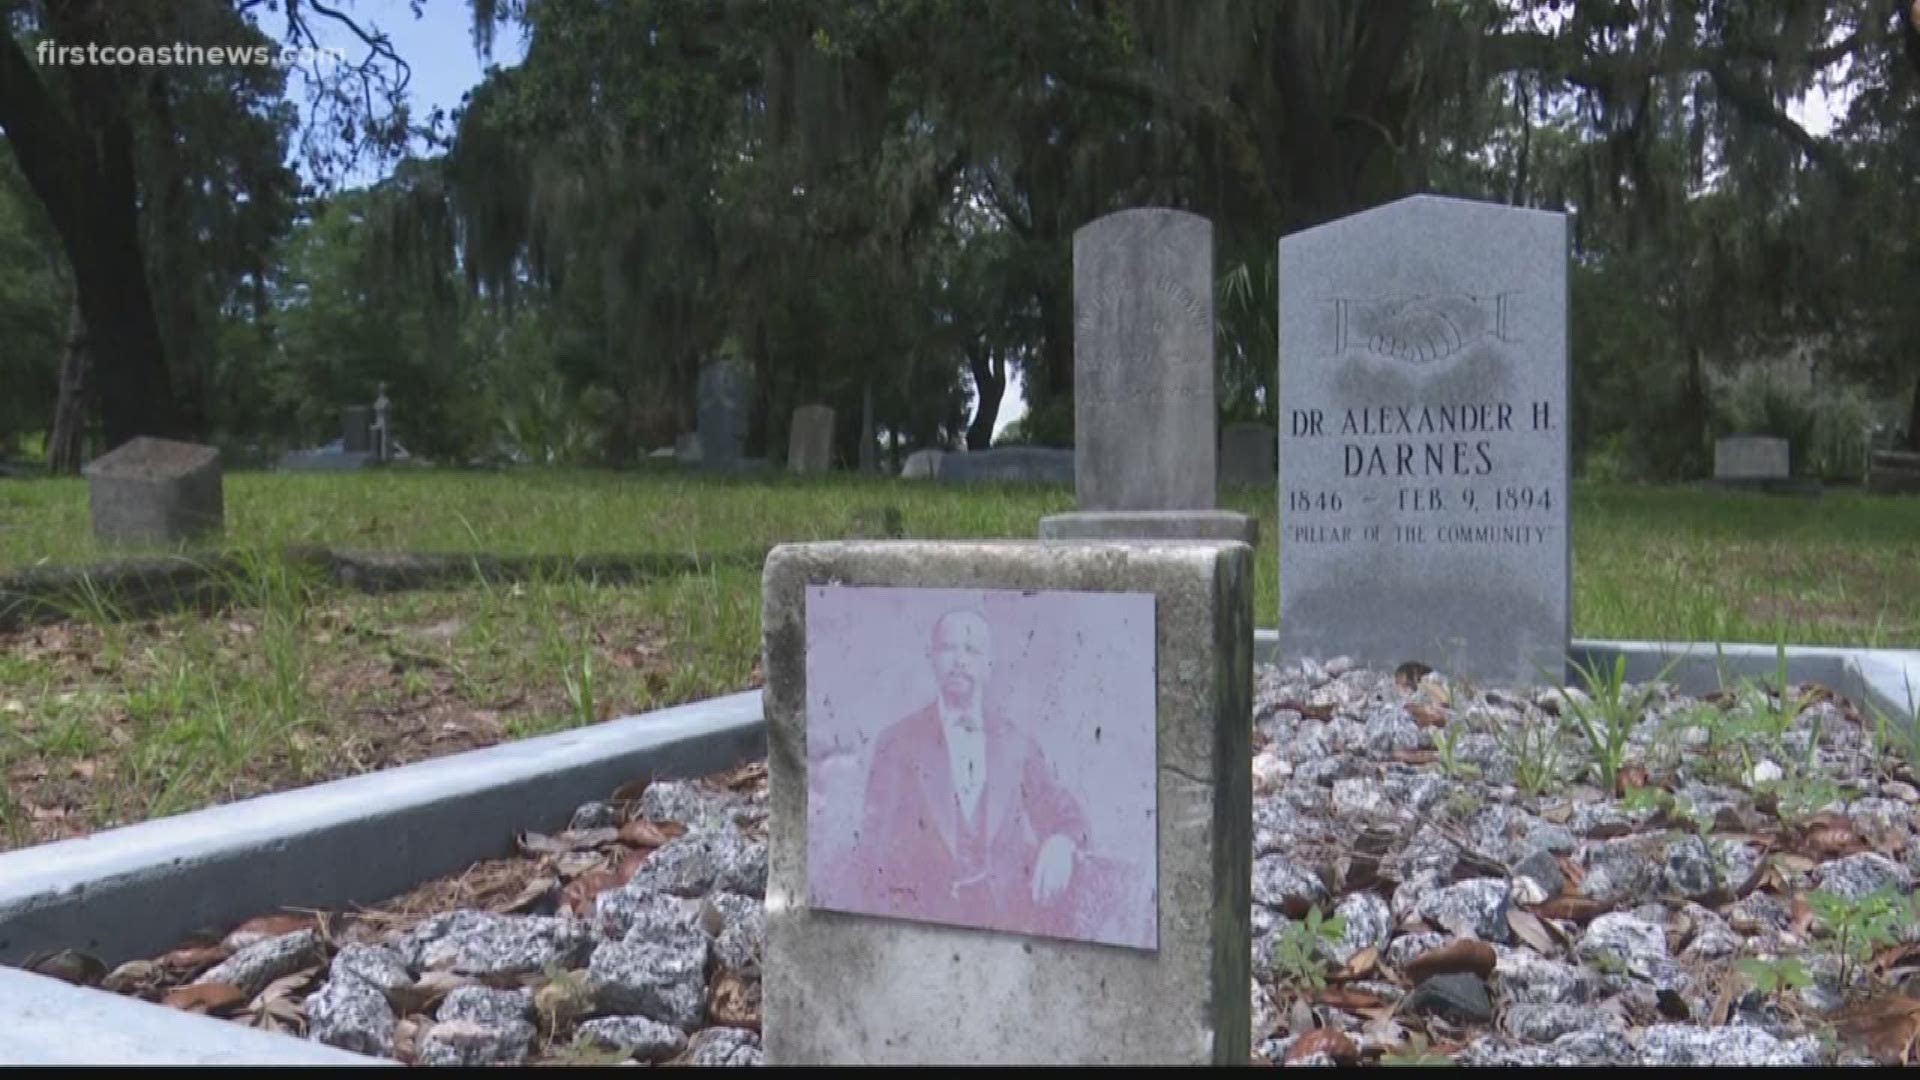 Old City Cemetery was the main burial site just before the Civil War. A resting place to soldiers, religious leaders, and Jacksonville's first African American physician: Alexander Darnes.